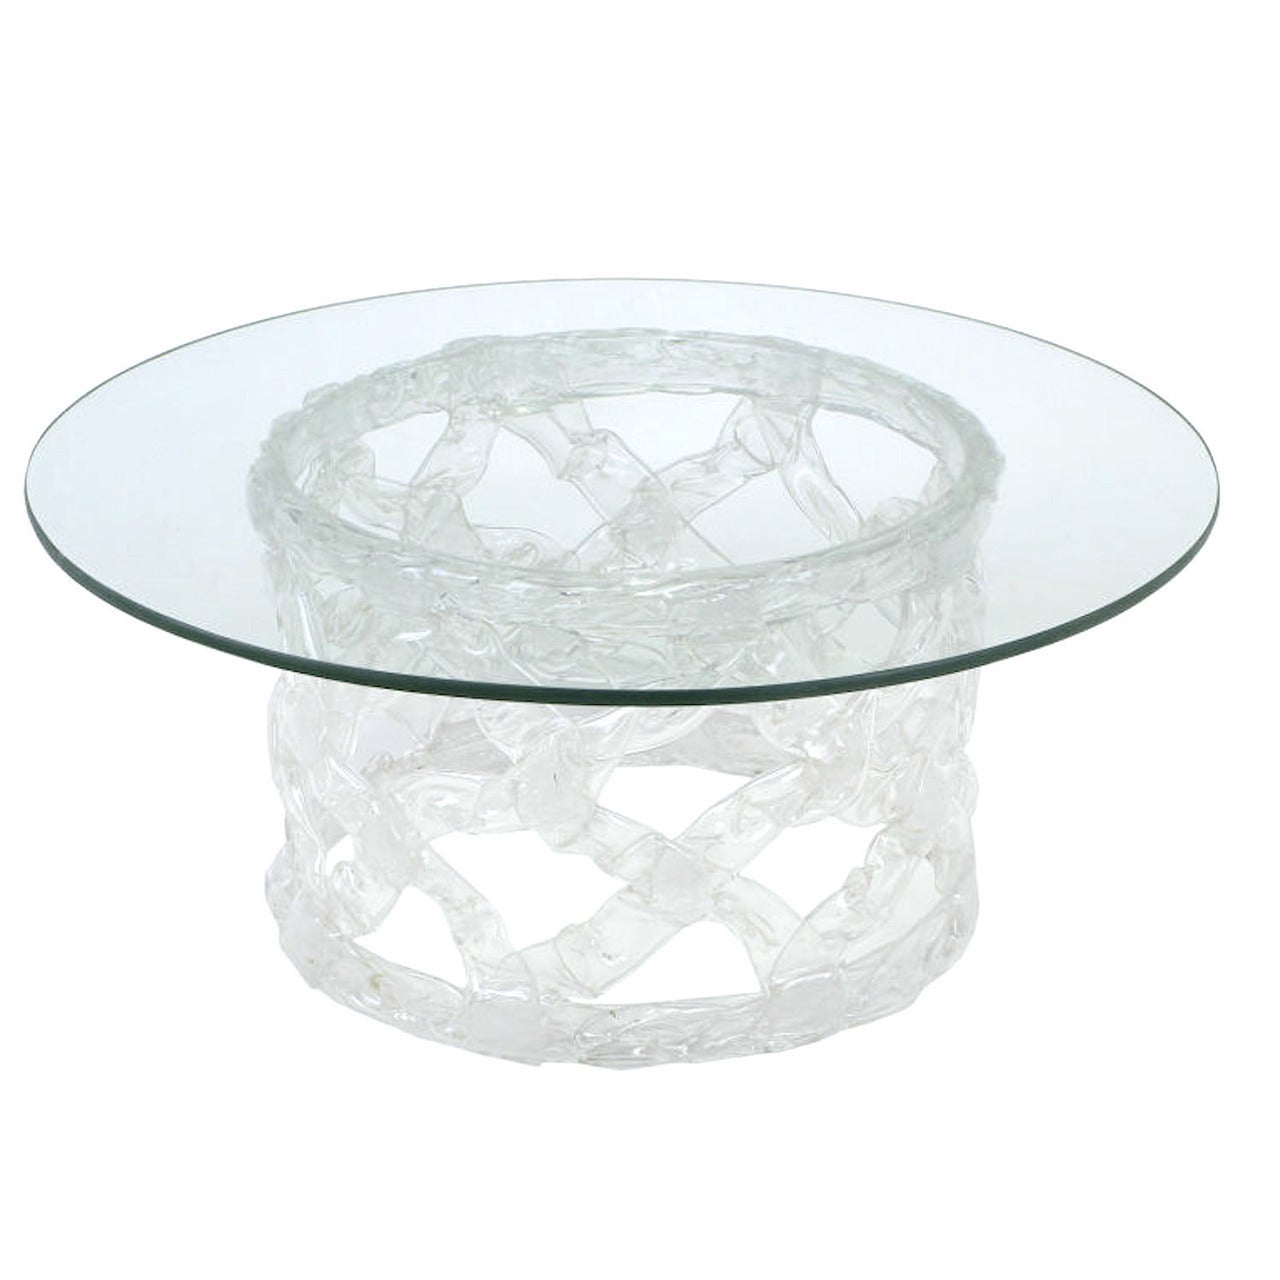 Round Reticulated Lucite & Glass Coffee Table